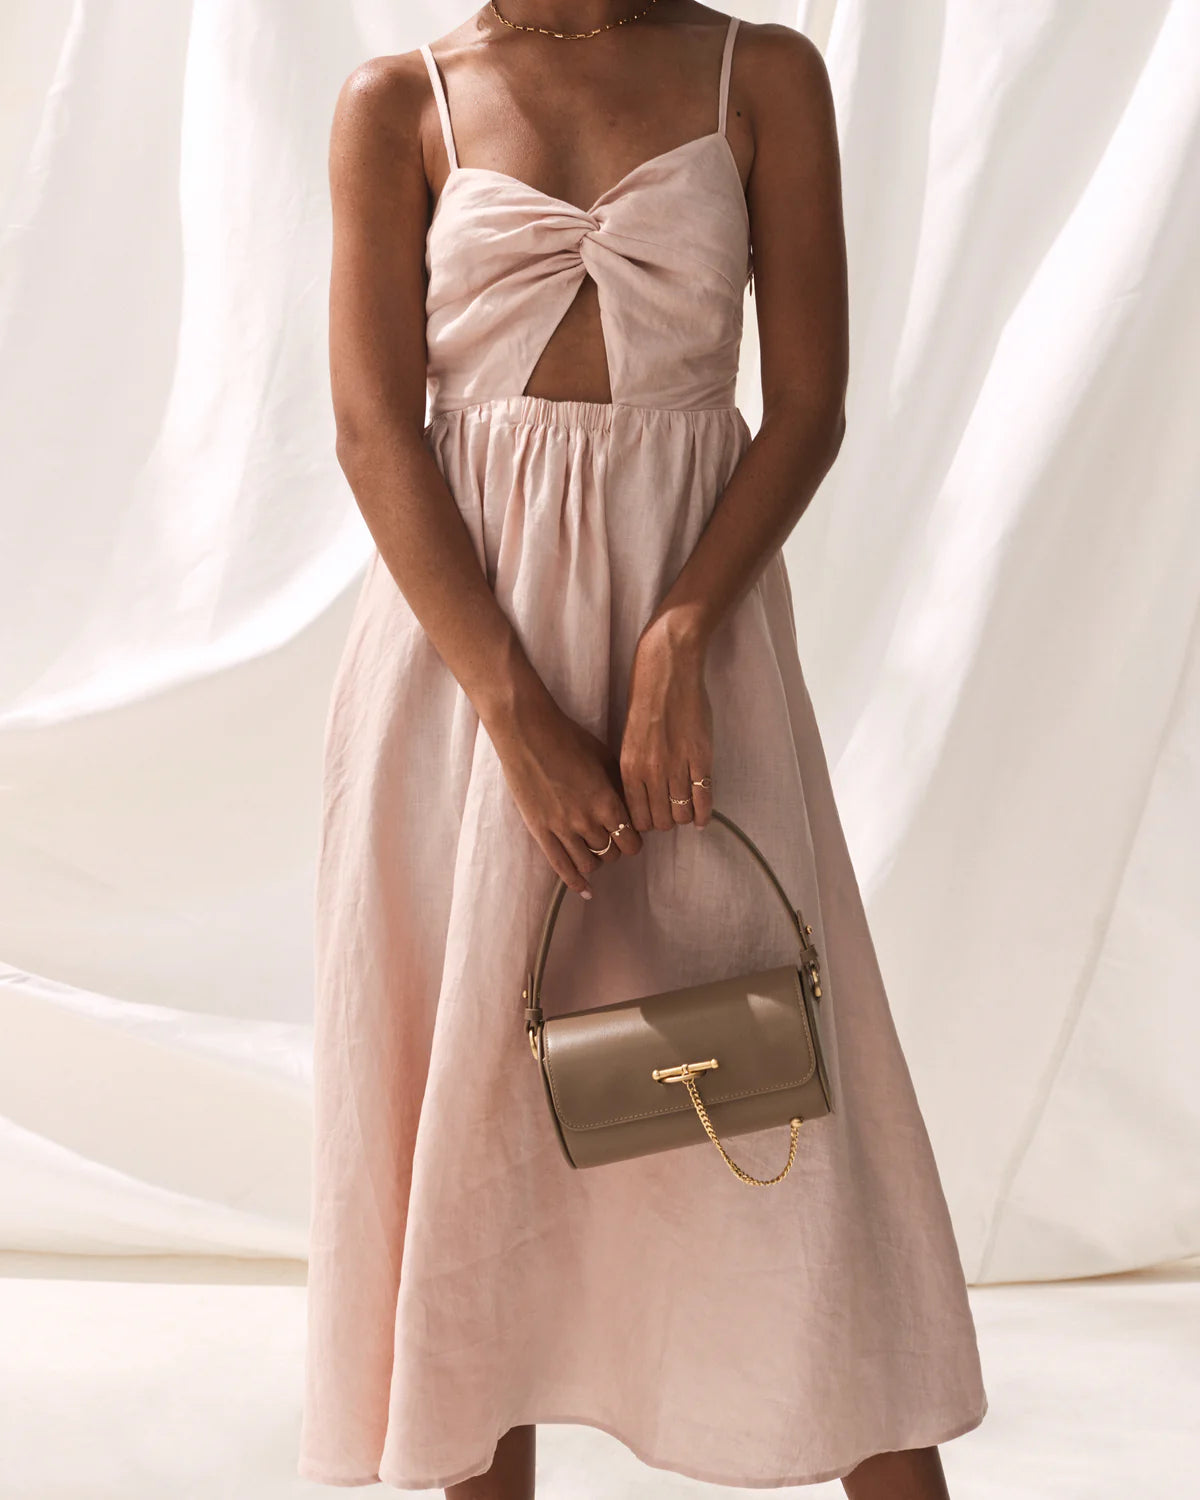 Blush pink dress with spaghetti straps knotted front midi skirt and criss cross tie detail at the back